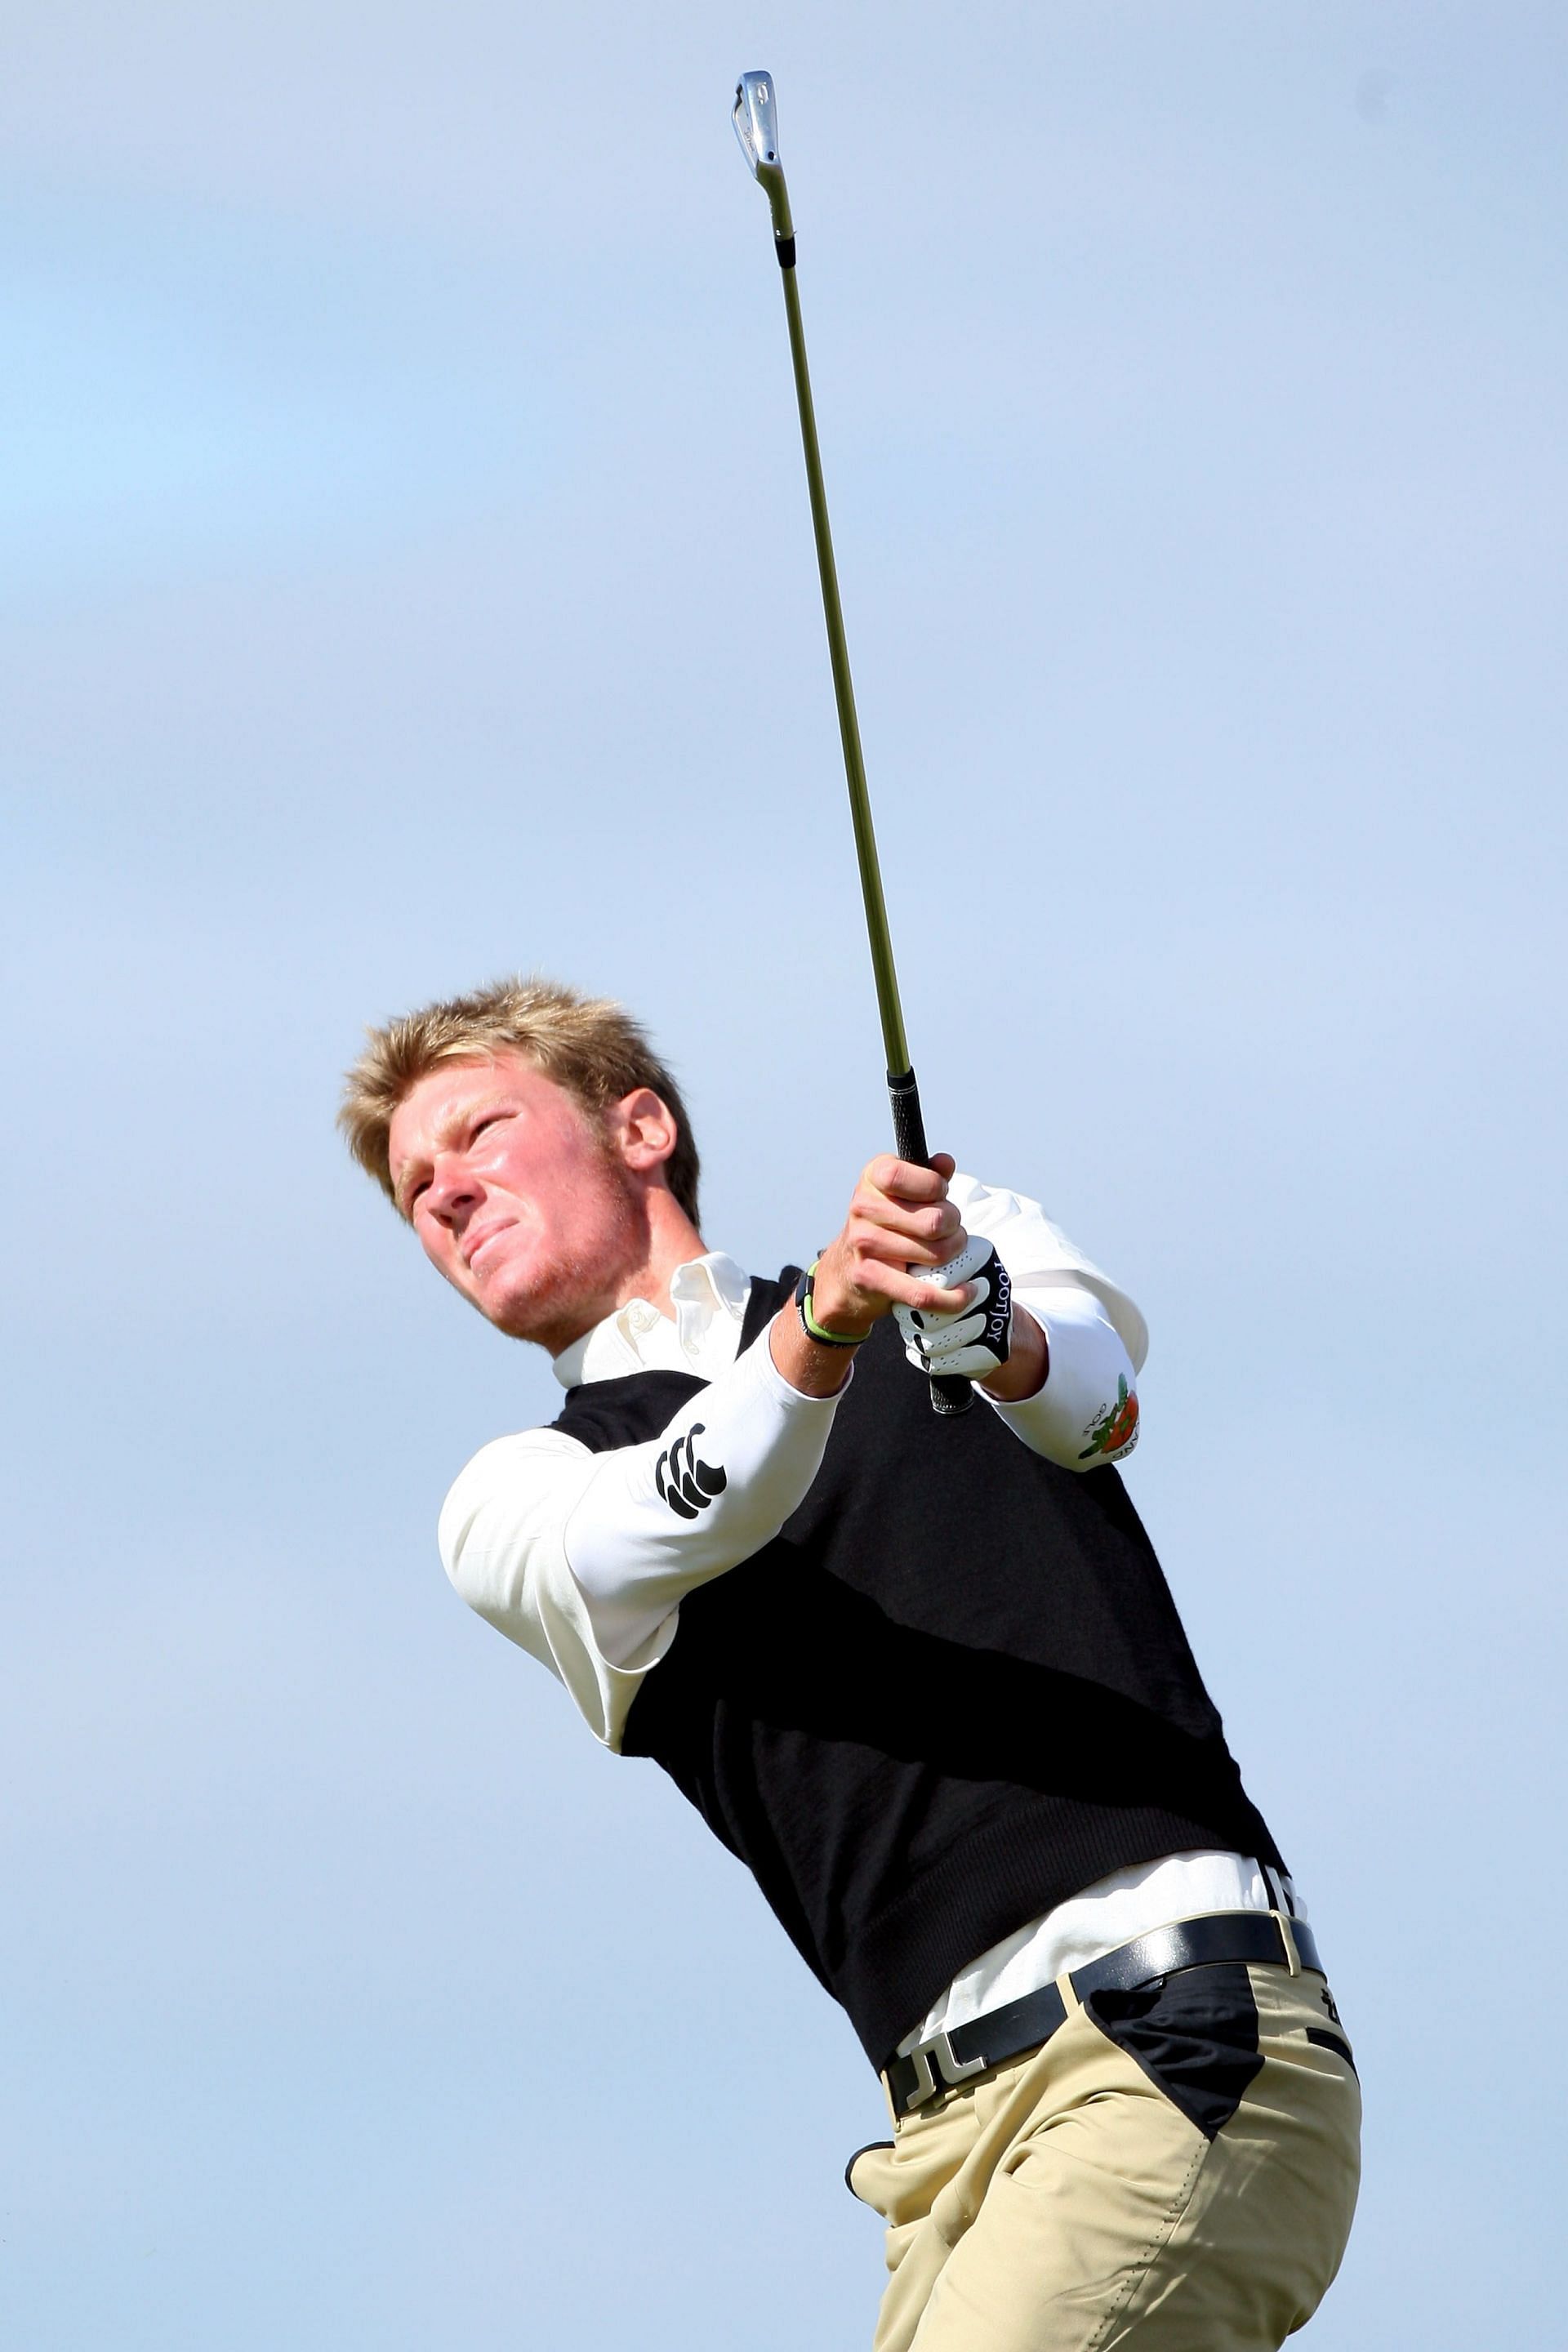 Chris Woods at the 137th Open Championship 2008 (Image via Getty)